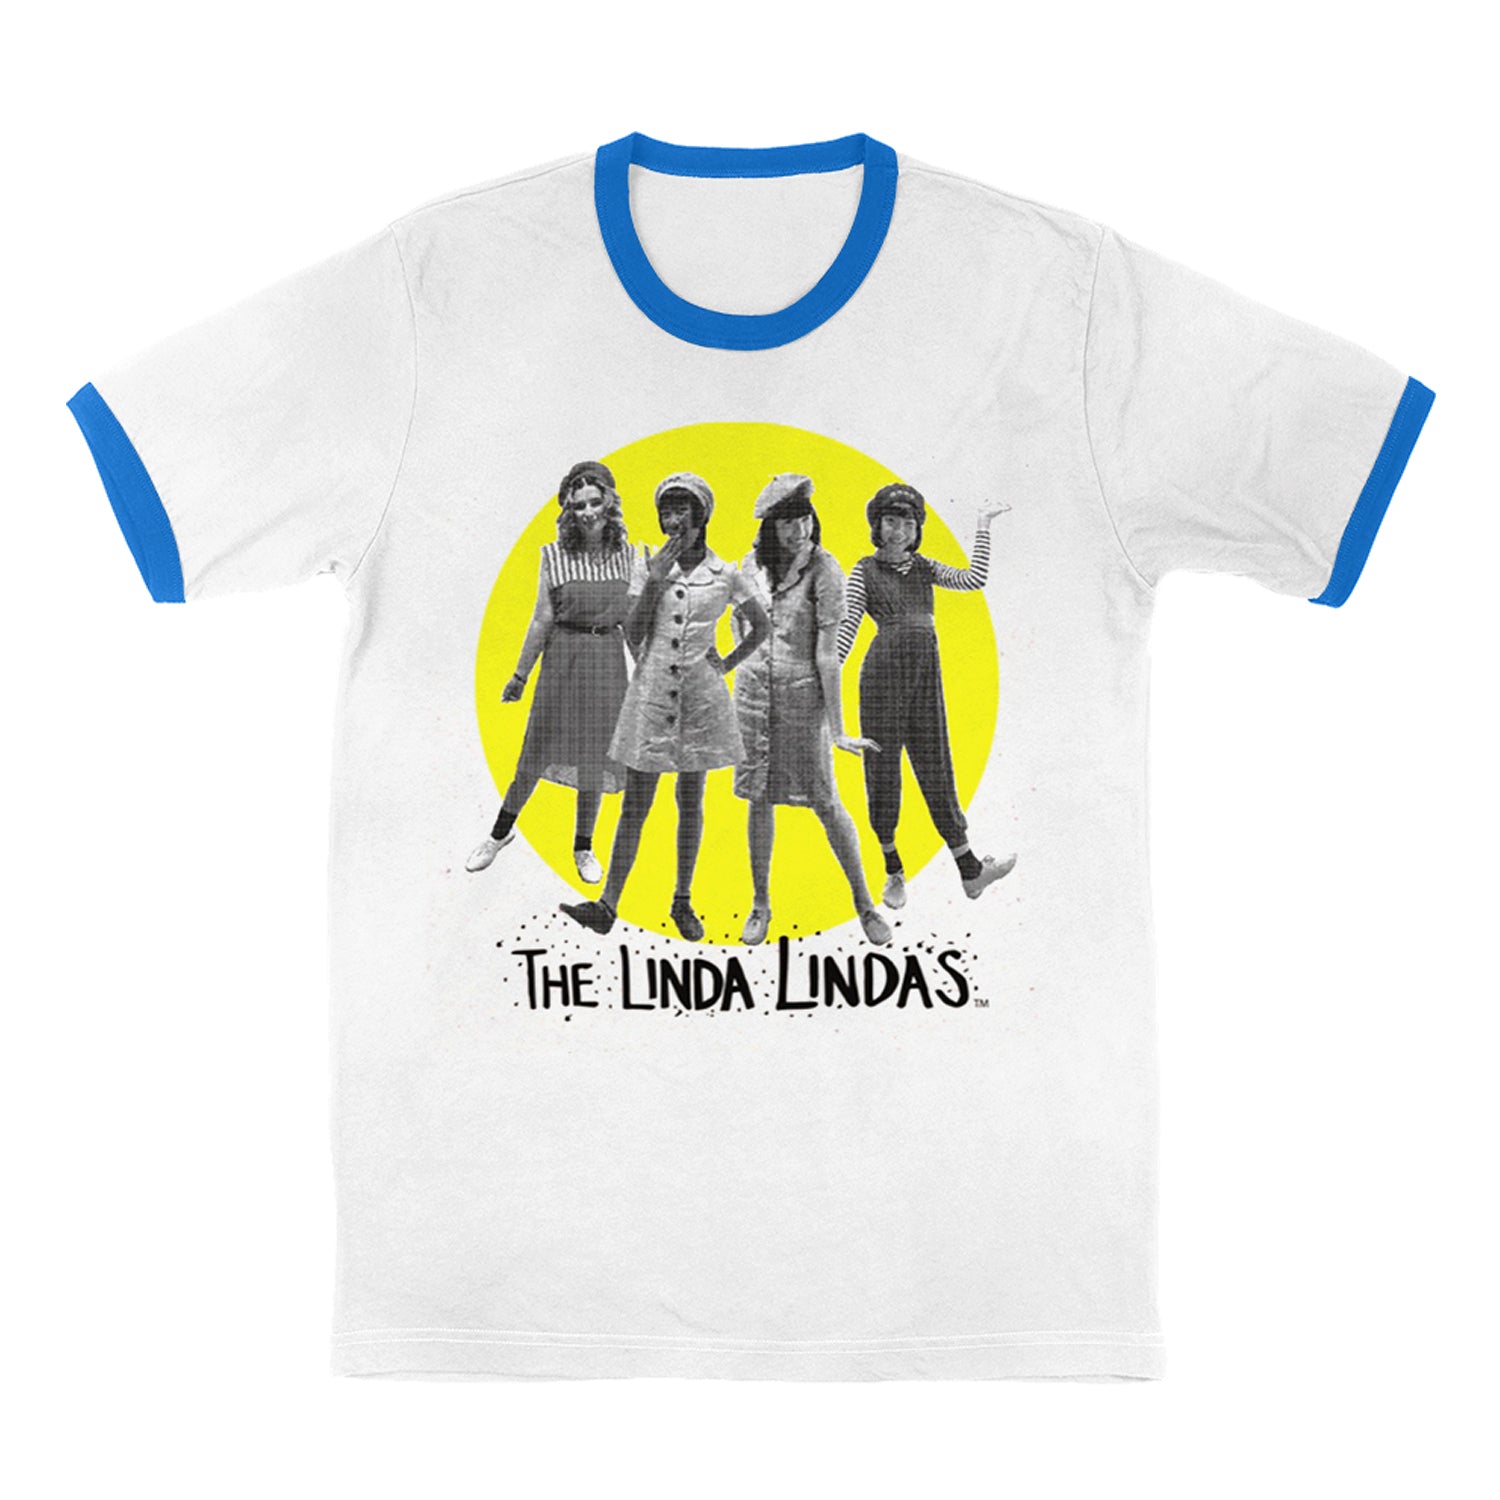 Image of a white tshirt against a white background. The center of the shirt features a yellow circle- inside the circle is a black and white image of the linda lindas standing and facing the camera. Below that in black thin writing reads "the linda Lindas". The cuffs of the sleeves and the neckline of the tee are blue.